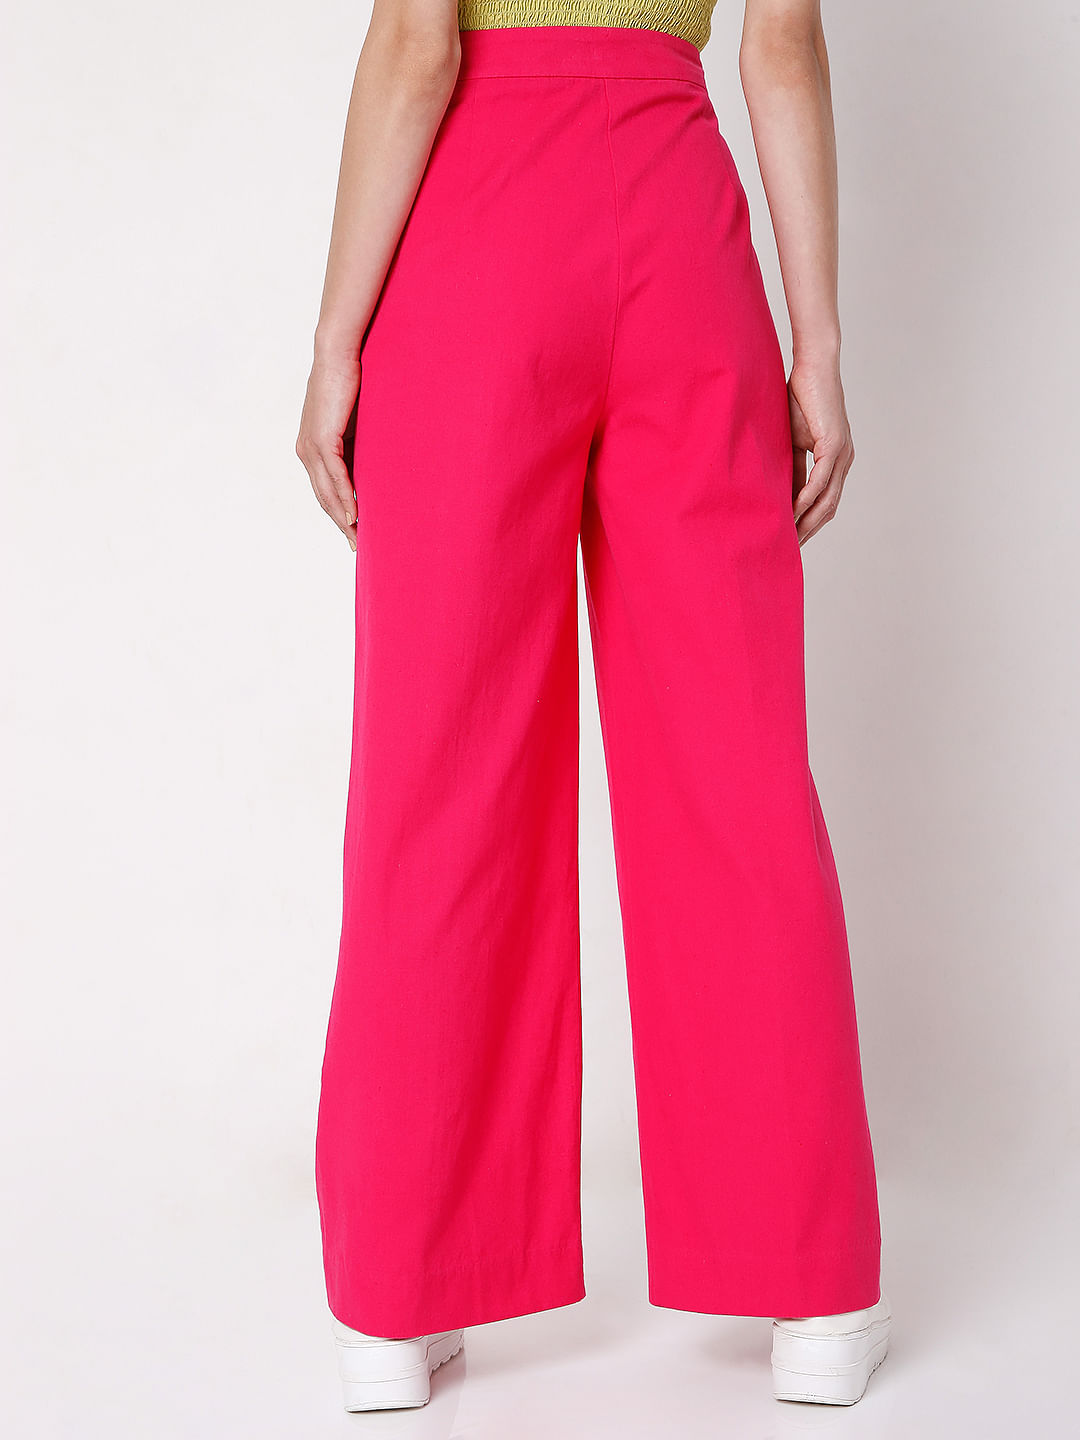 Only elasticated waist wide leg trousers in black  ASOS